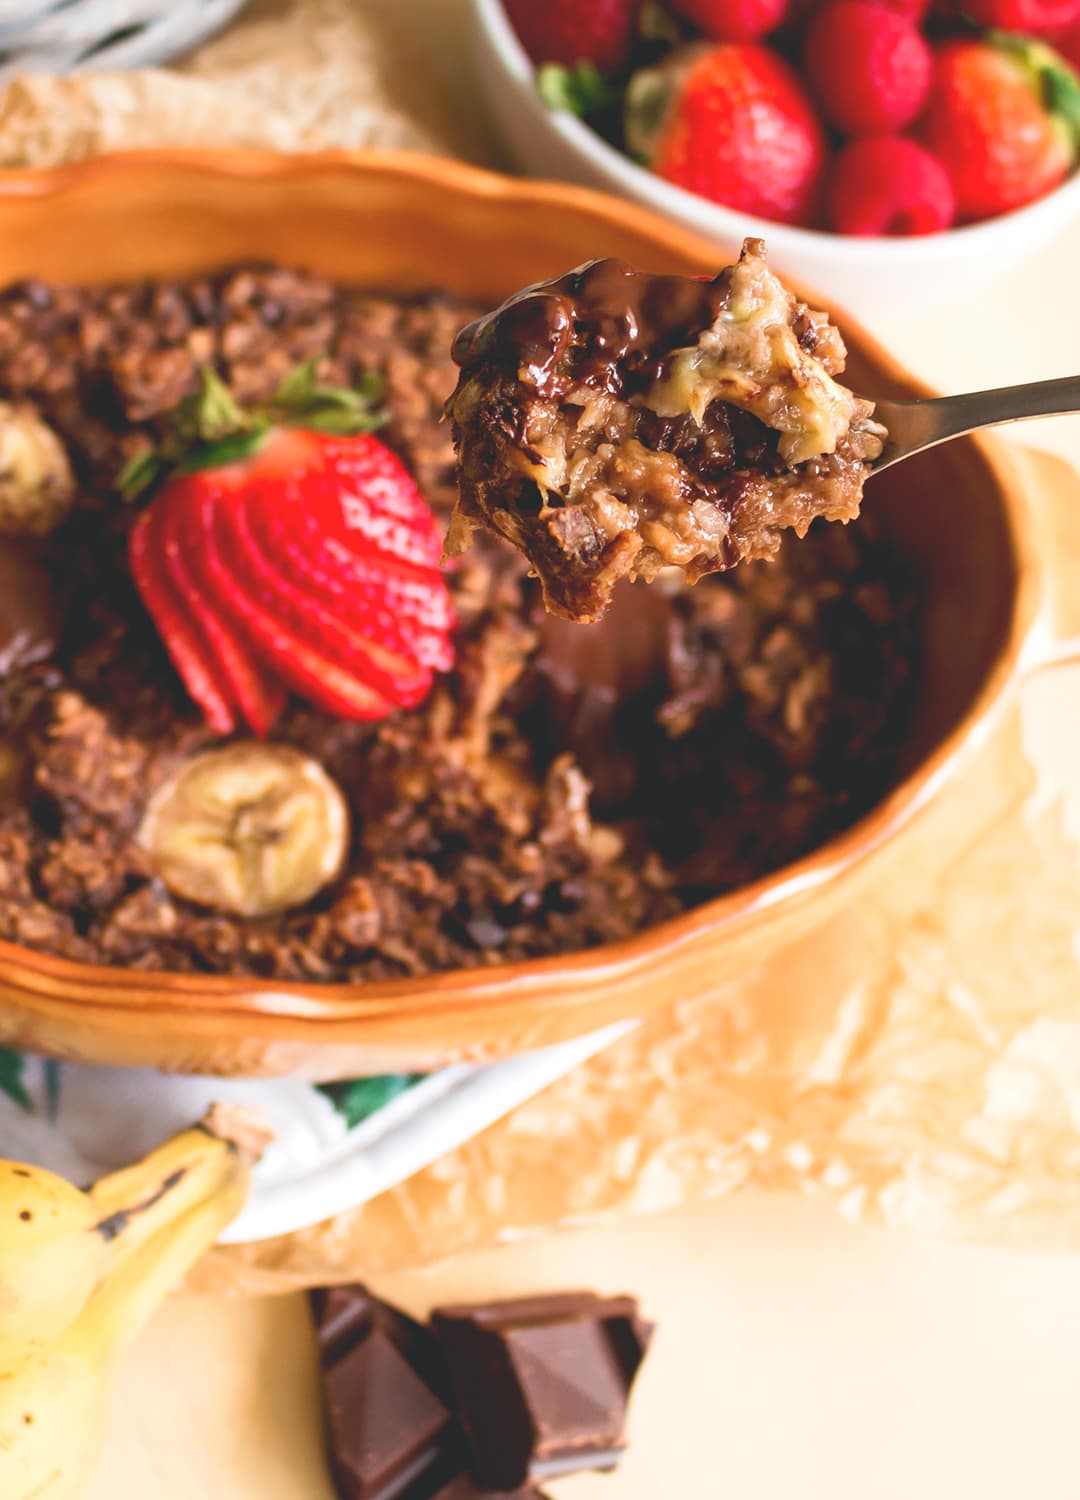 Chocolate Maca Baked Oatmeal - delicious nutirious baked oatmeal recipe you'r going to love! Full of superfoods, really tasty, and easy to make! | thehealthfulideas.com